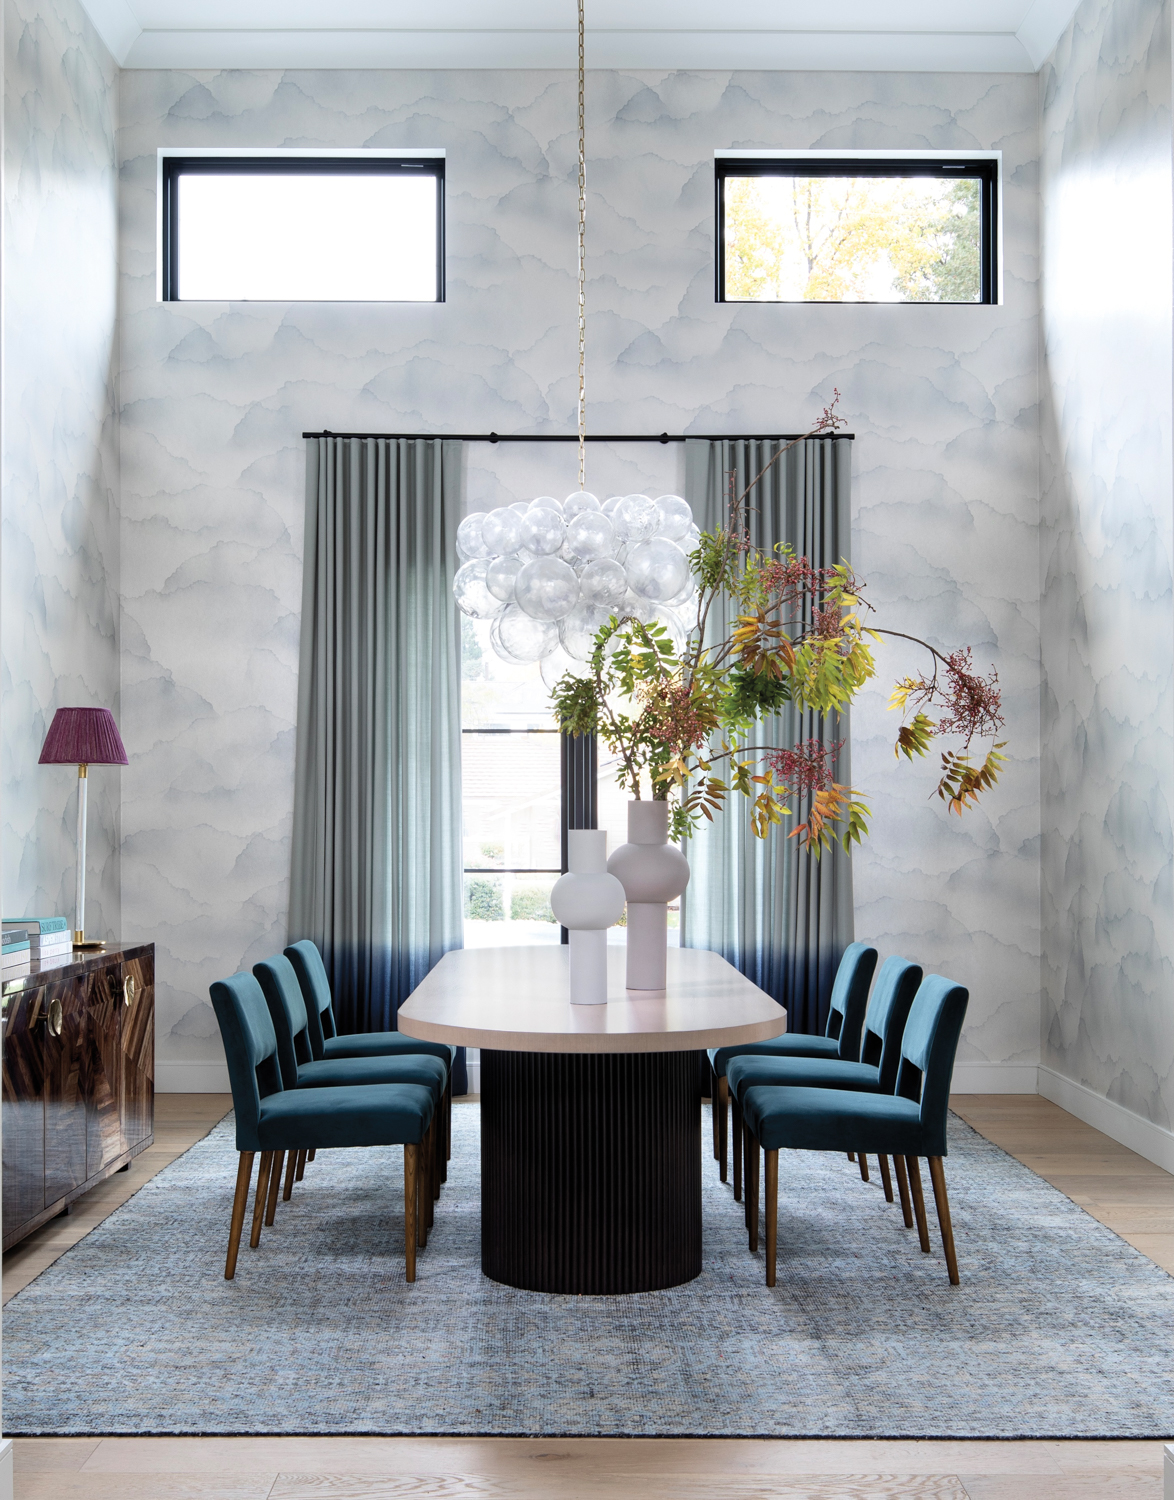 Dining room with cloud-like wallpaper, glass bubble chandelier and blue-upholstered chairs